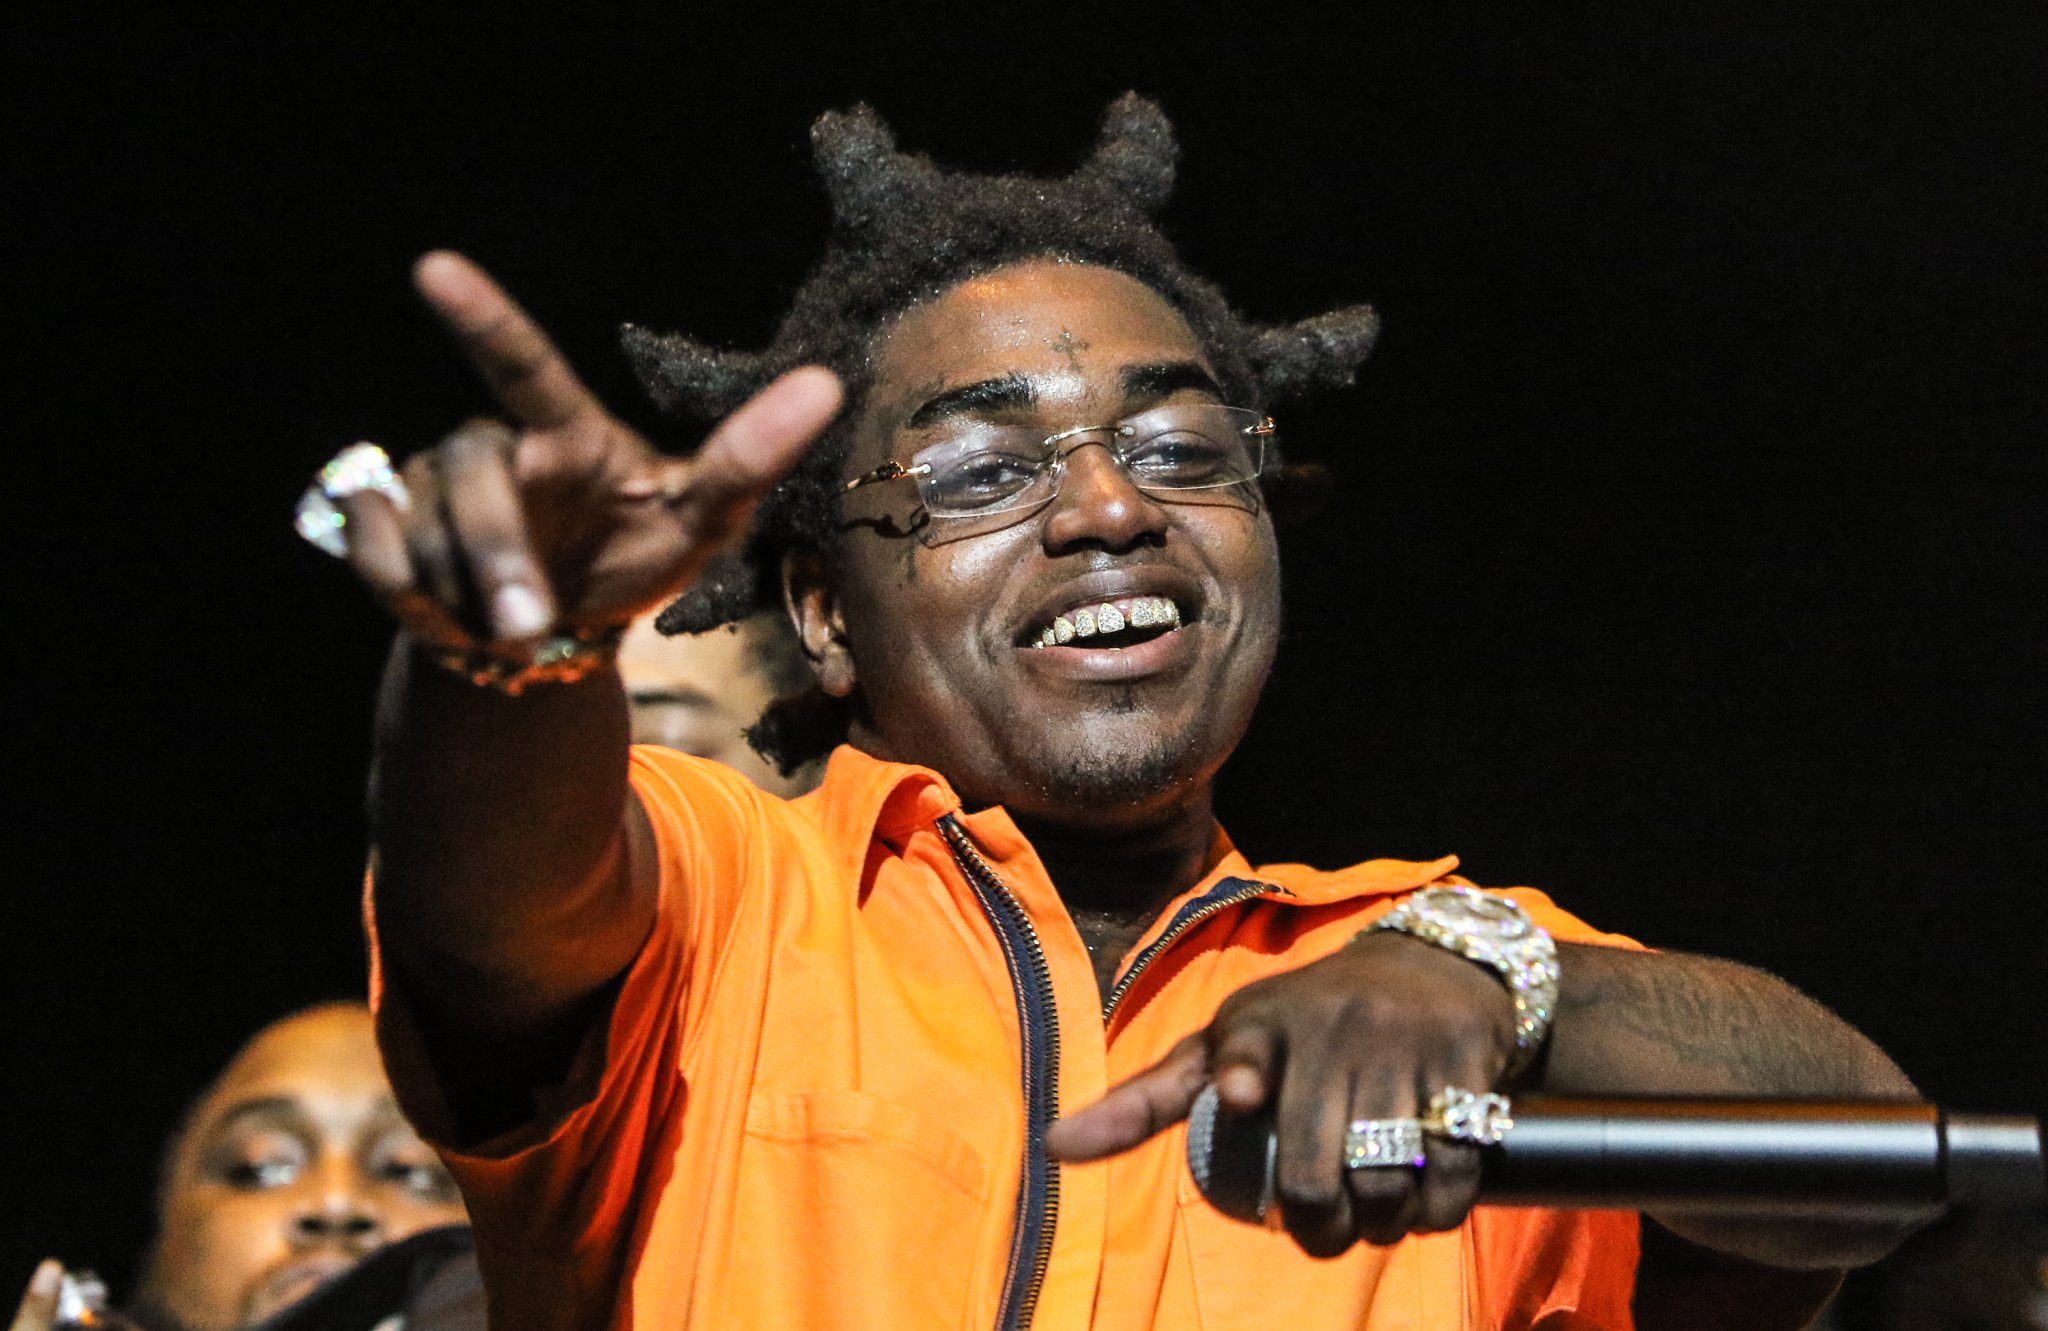 Kodak Black Clone Conspiracy Theory Goes Viral After He Looked Unrecognizable In First Public Appearance Following Pardon